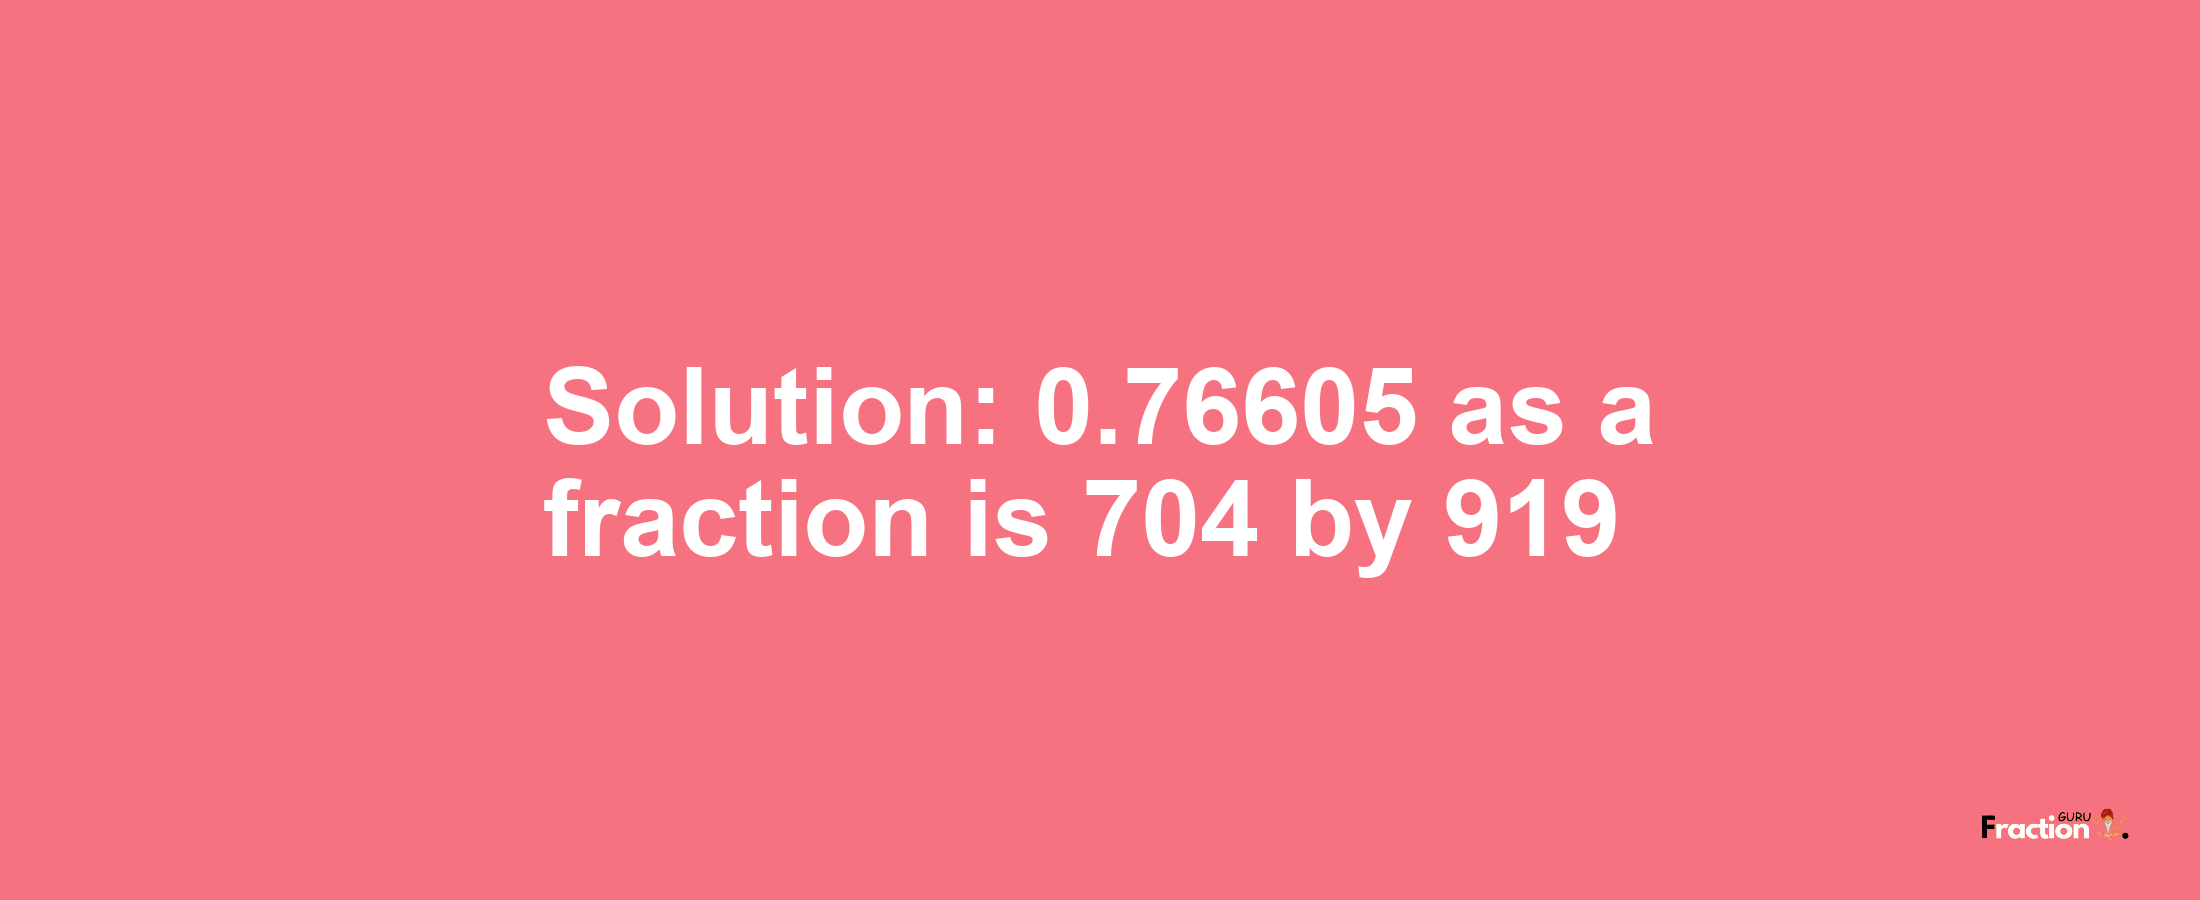 Solution:0.76605 as a fraction is 704/919